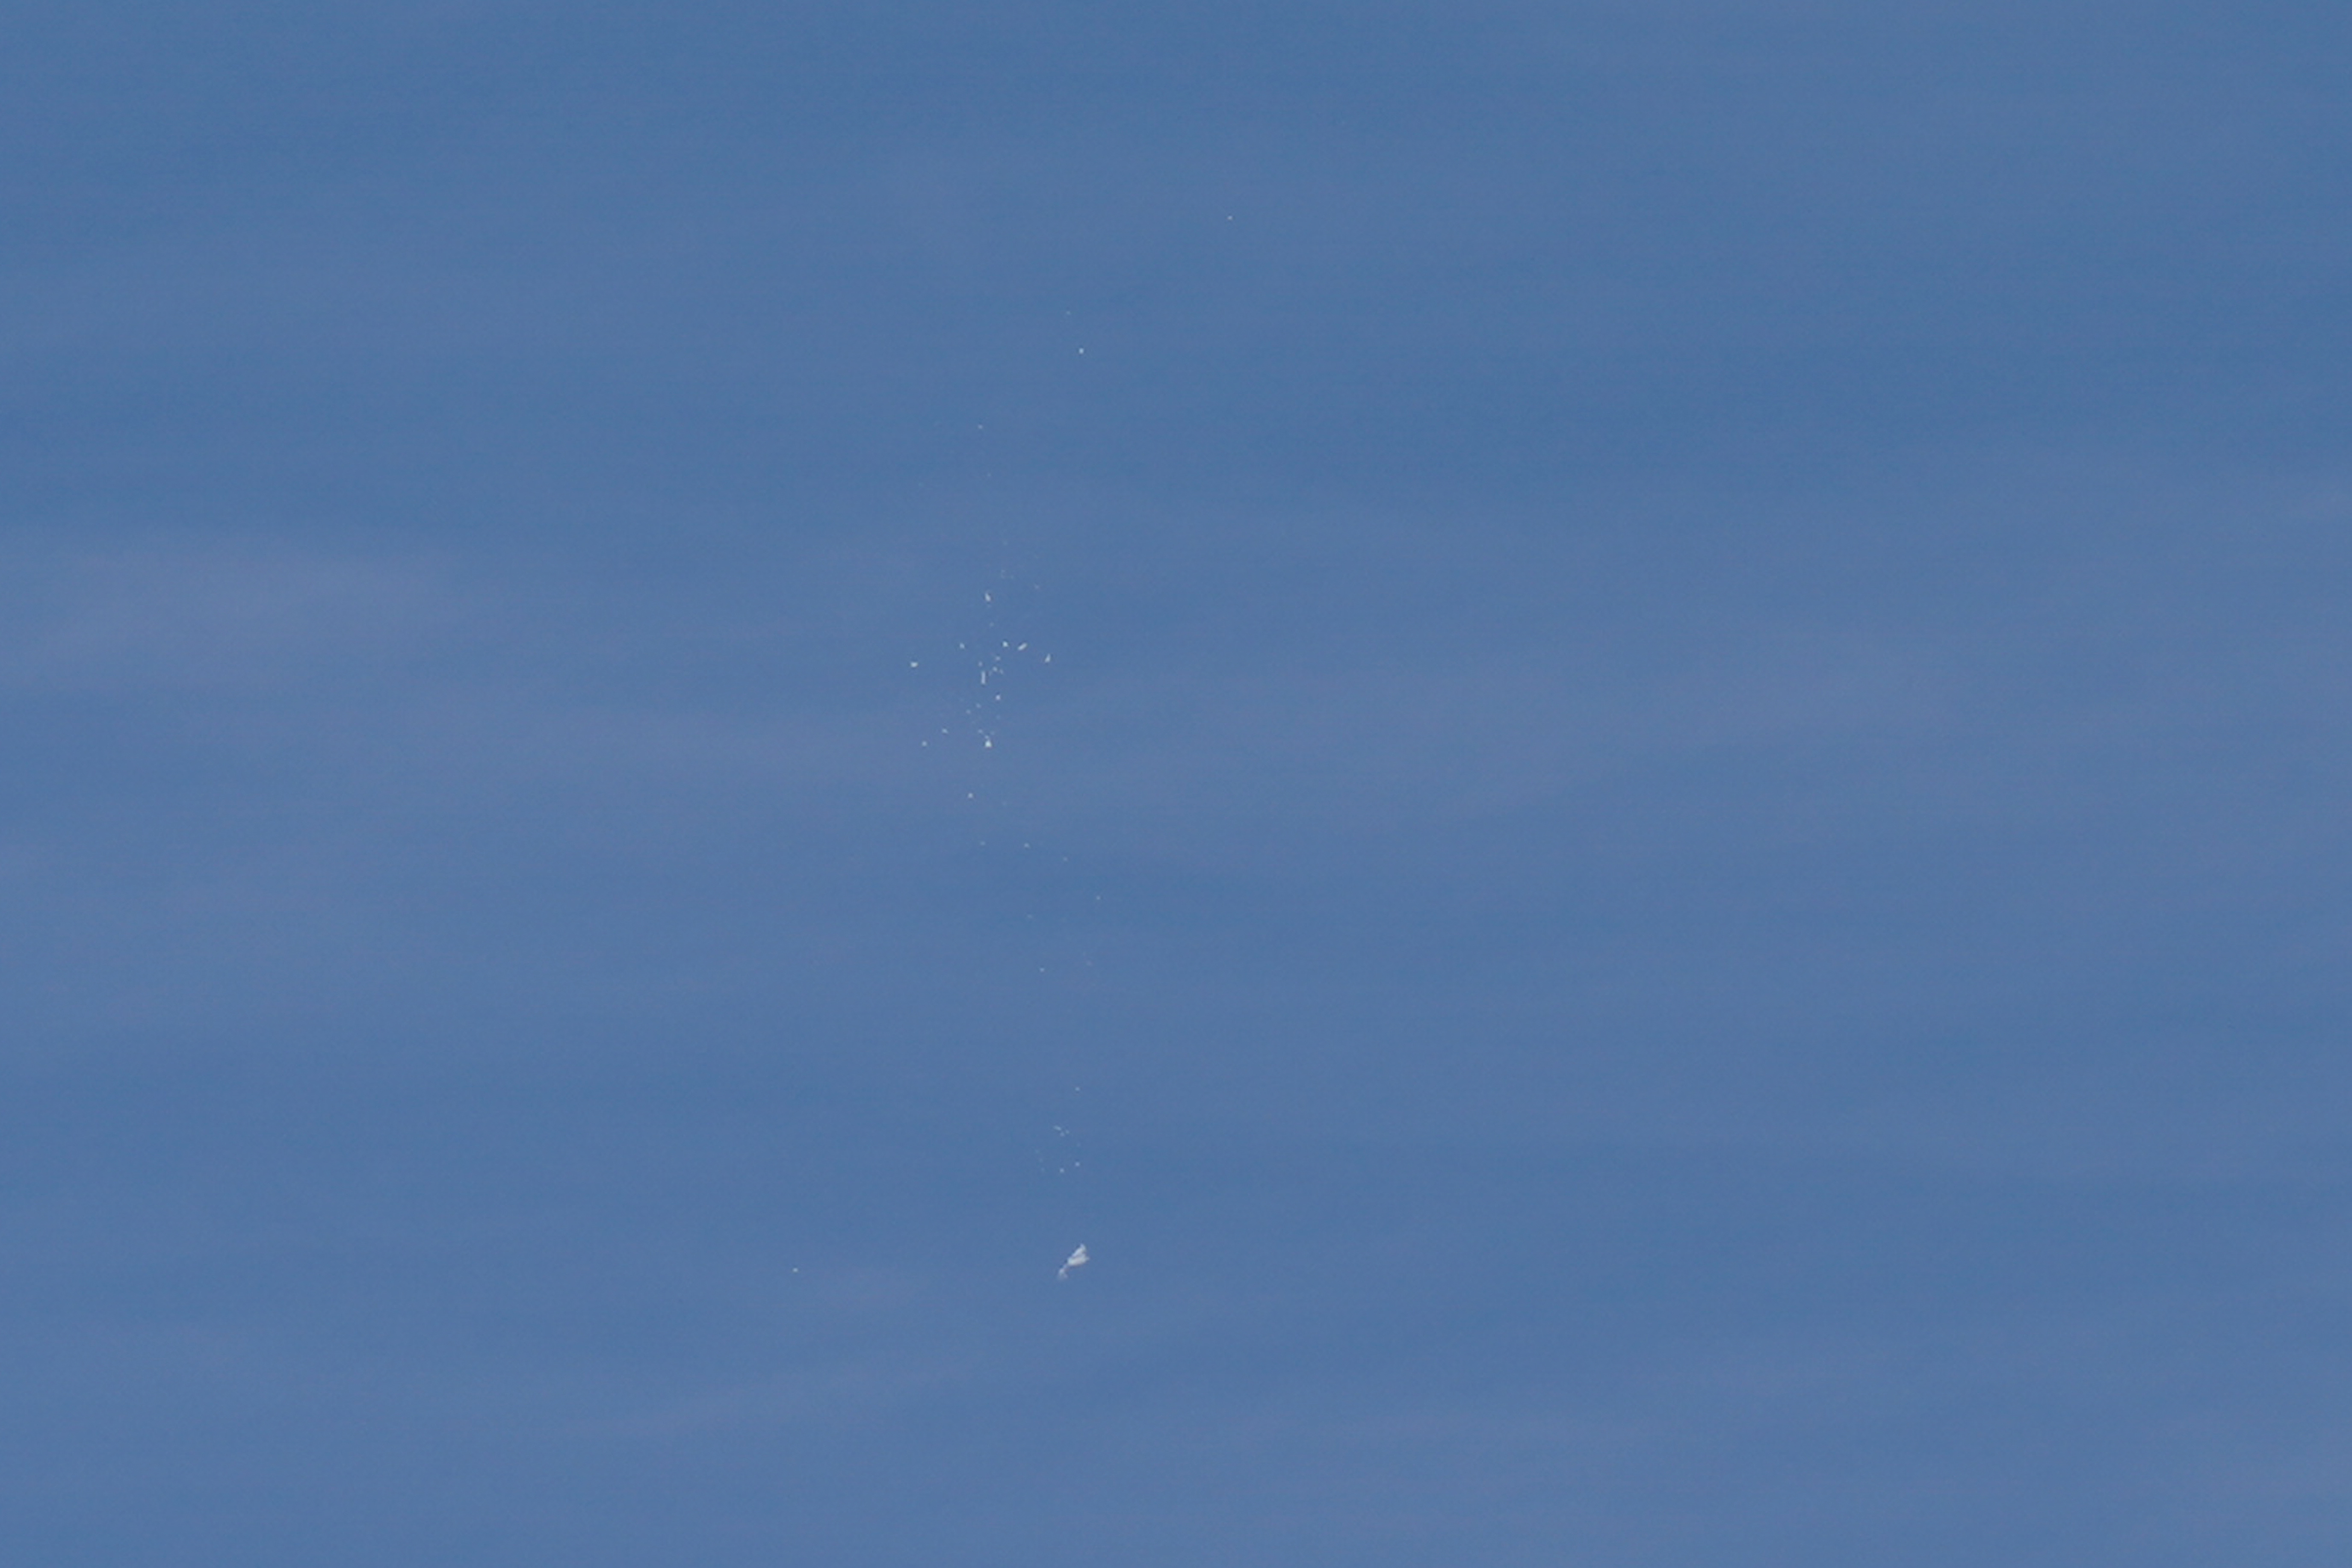 A view of what is believed to be a suspected Chinese spy balloon when it was shot down, seen from Holden Beach